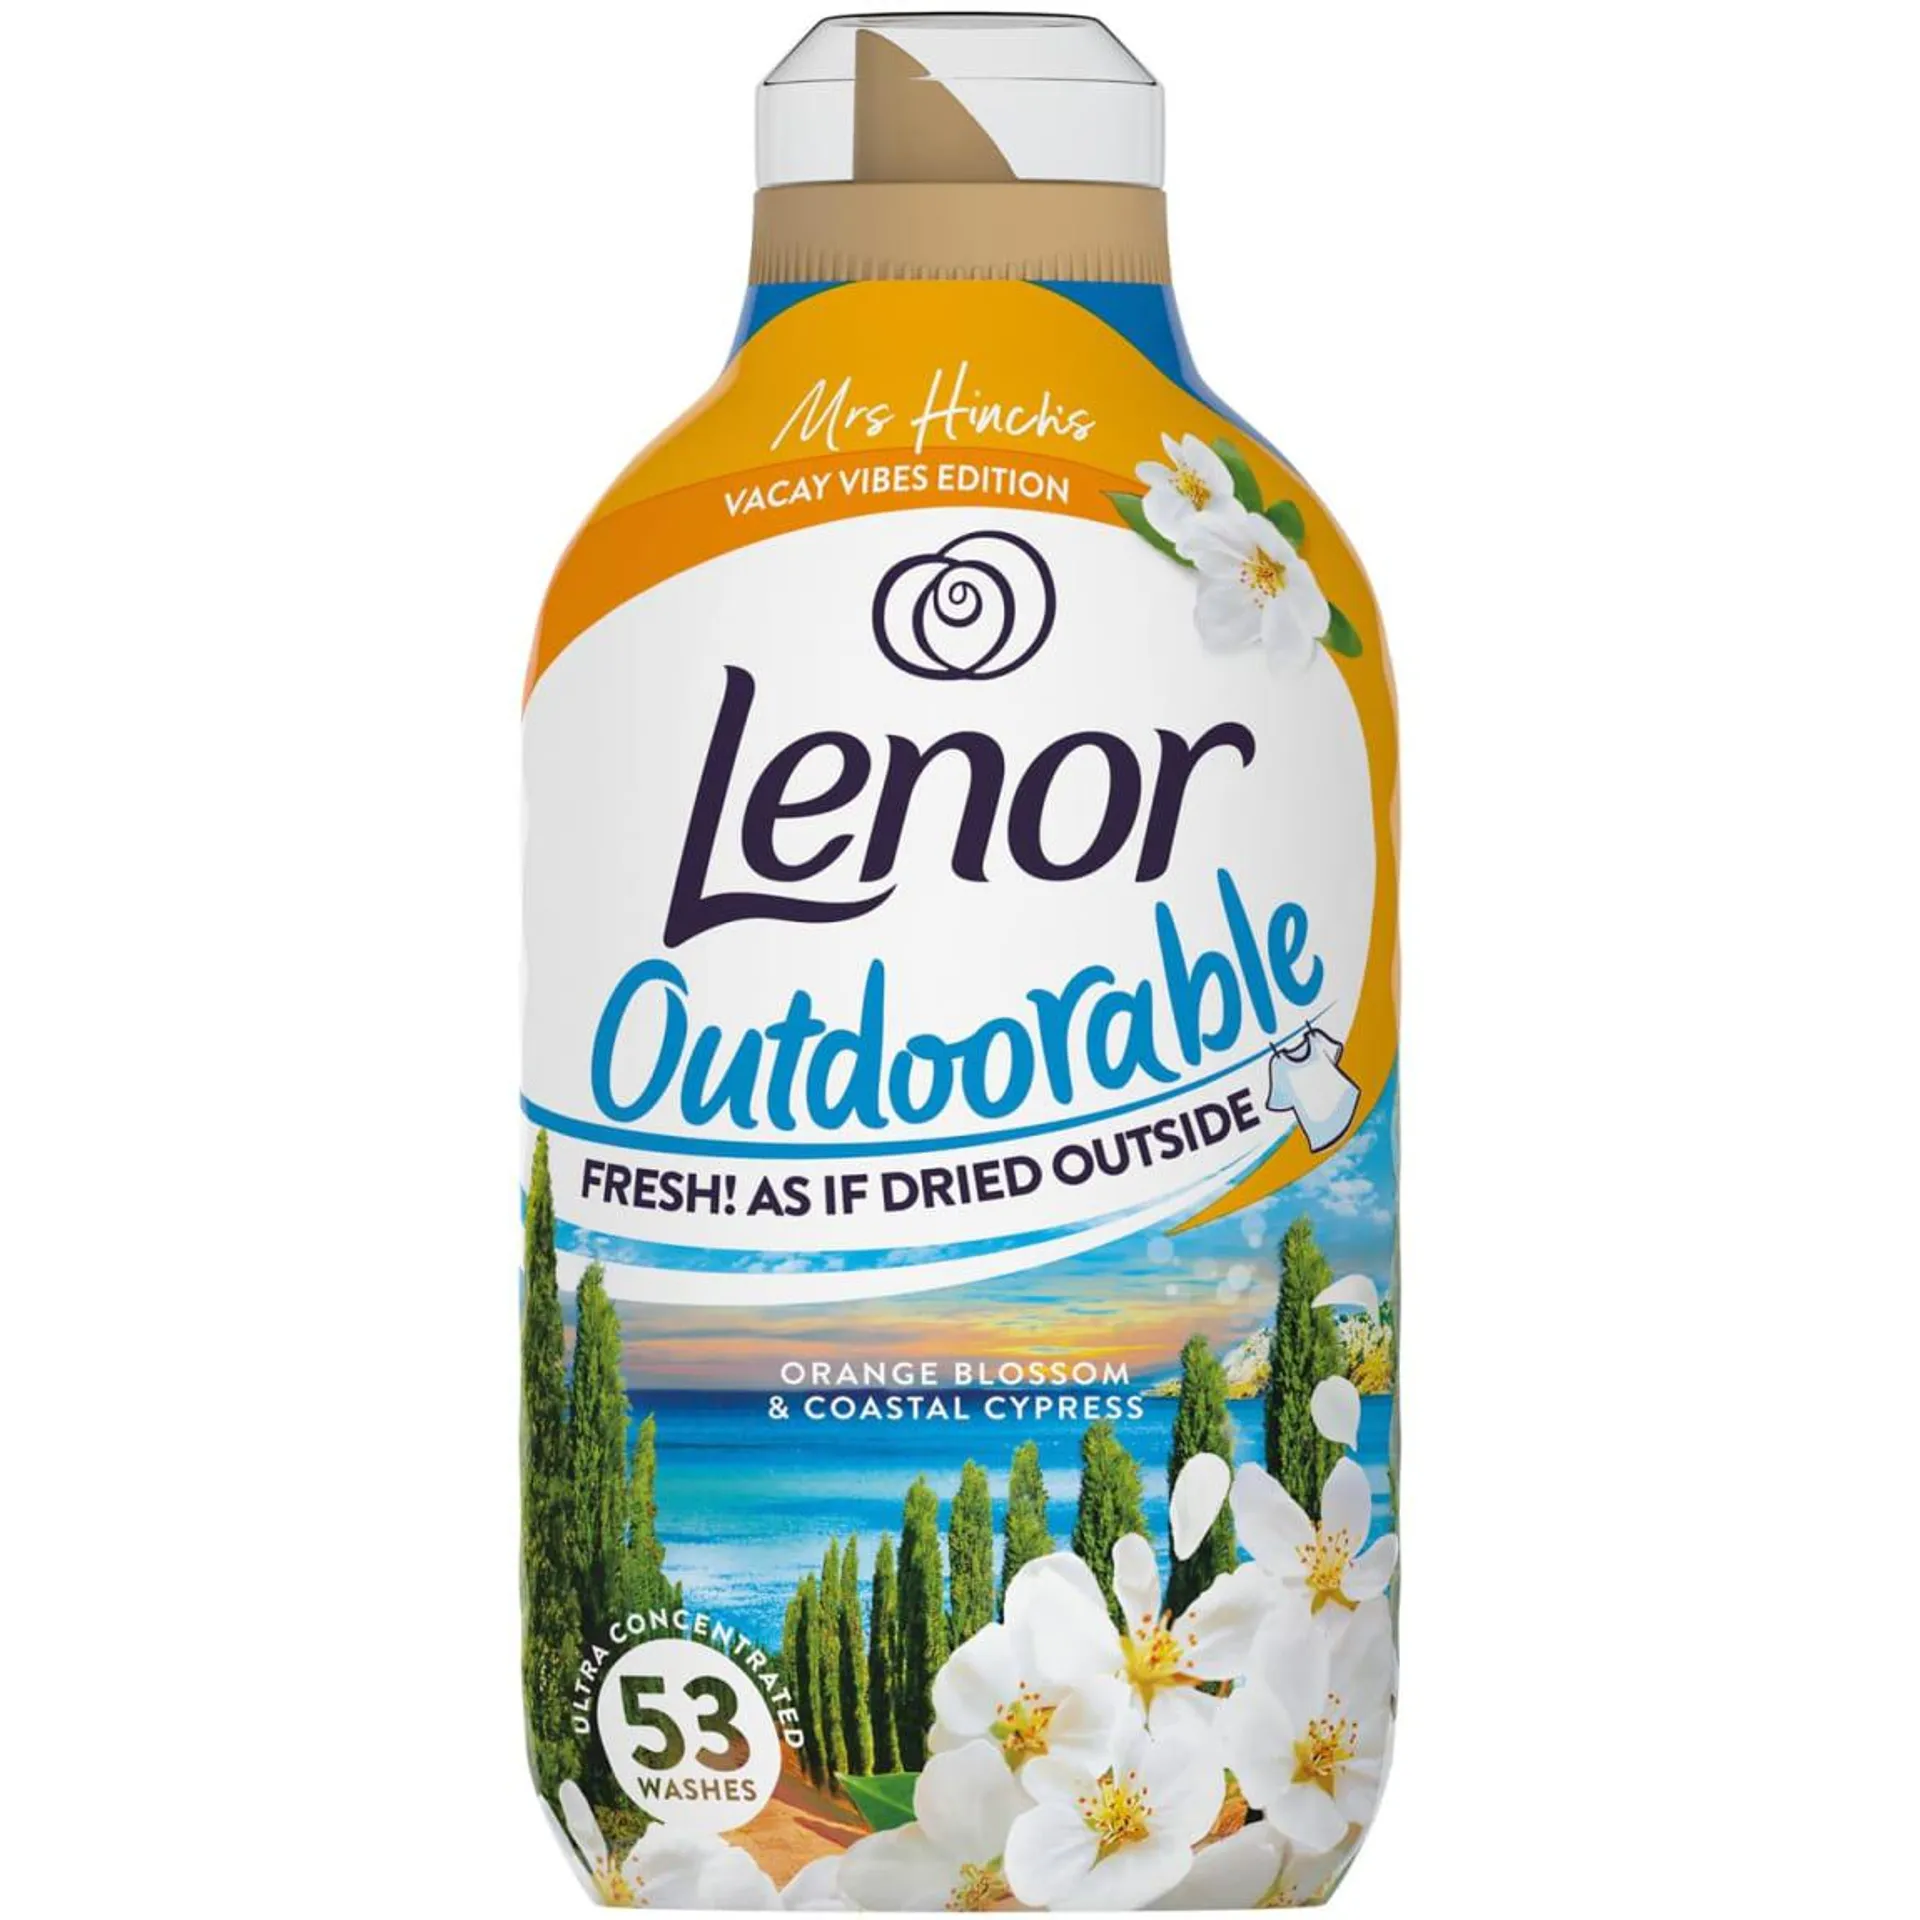 Mrs Hinch's Vacay Vibes Edition - Lenor Outdoorable Fabric Conditioner 53W - Orange Blossom & Coastal Cypress